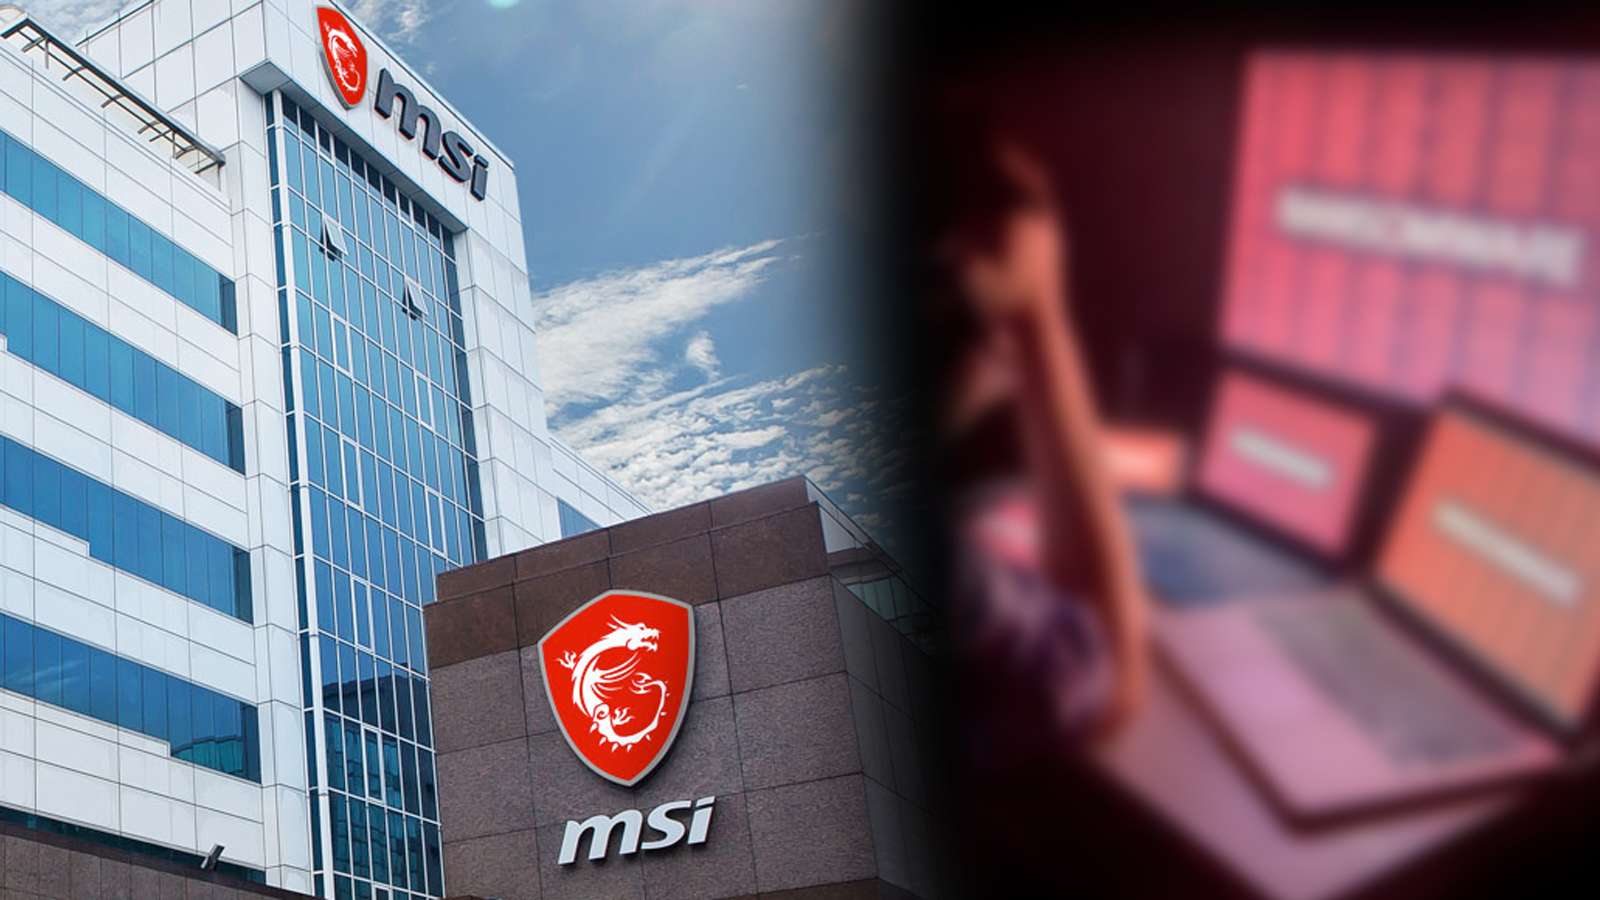 MSI offices with a man blurred with ransomware